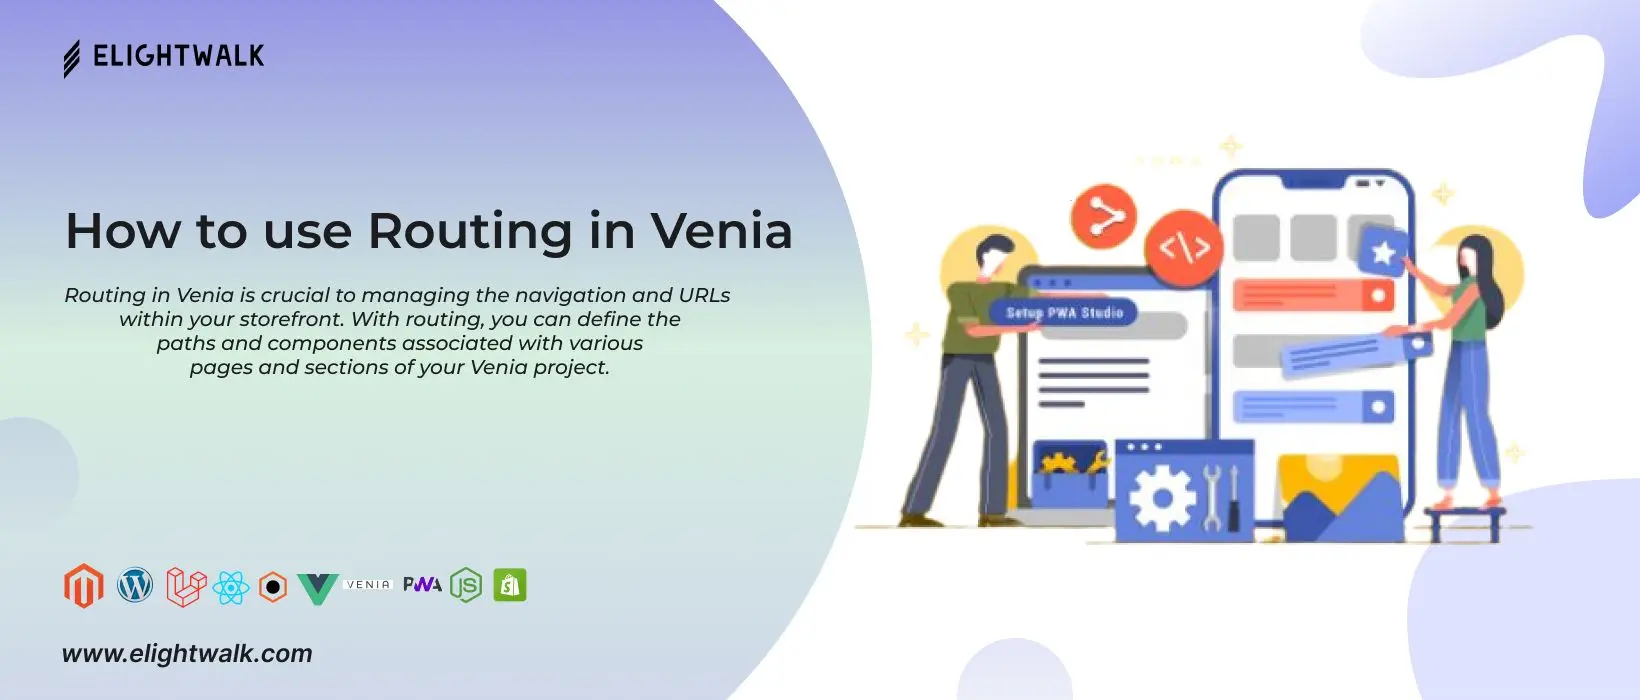 How to use Routing in Venia